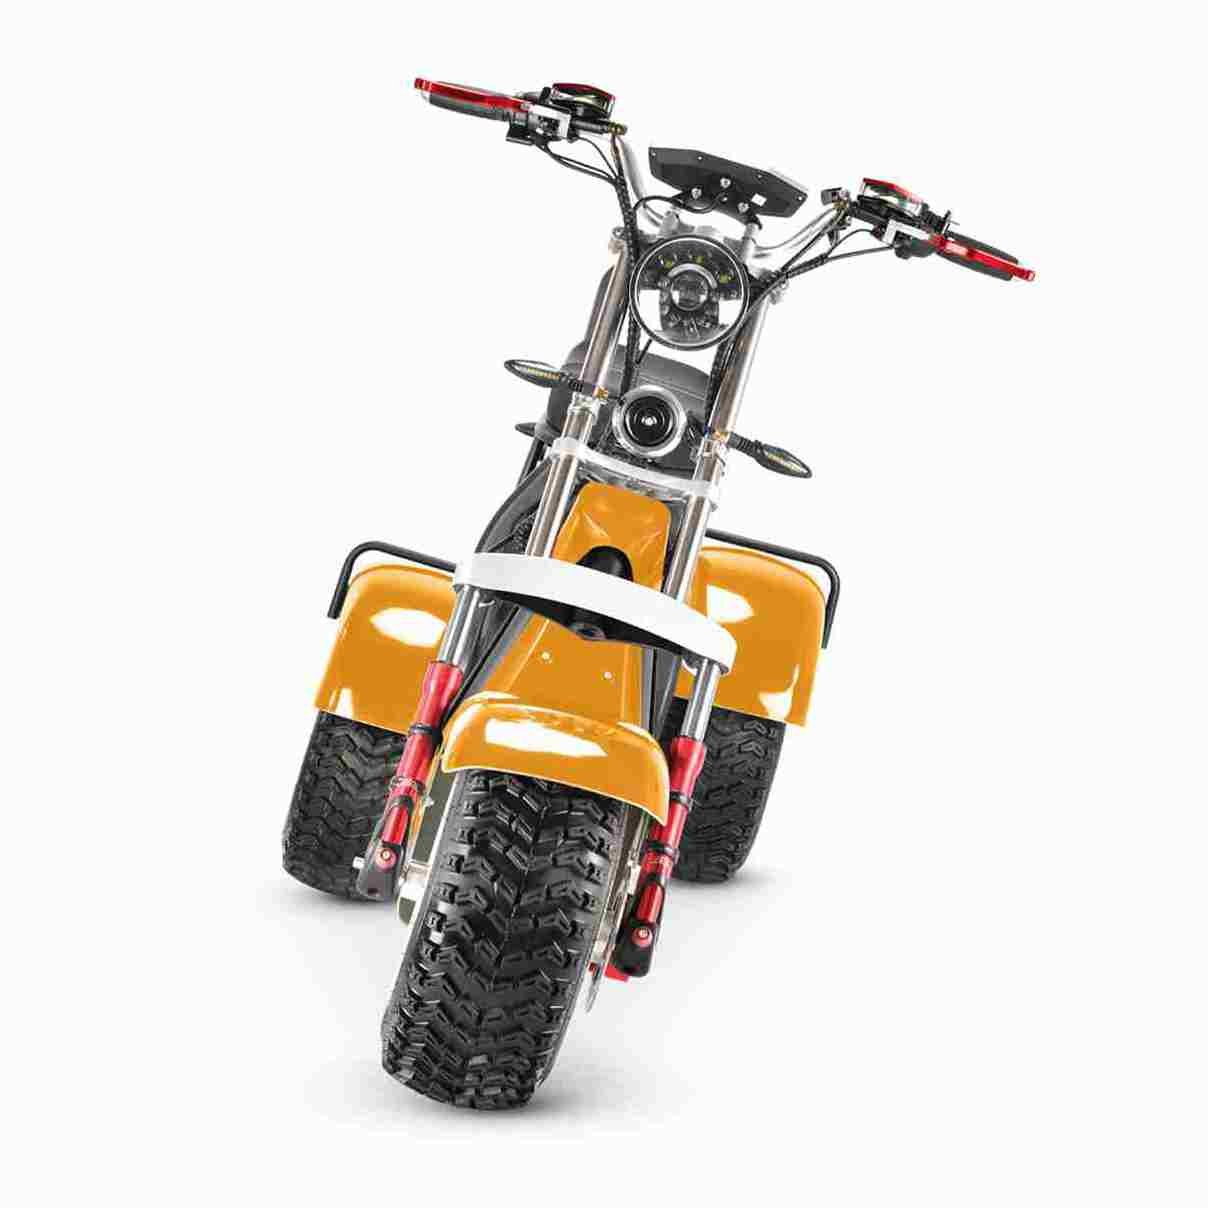 Citycoco Scooter 2000w